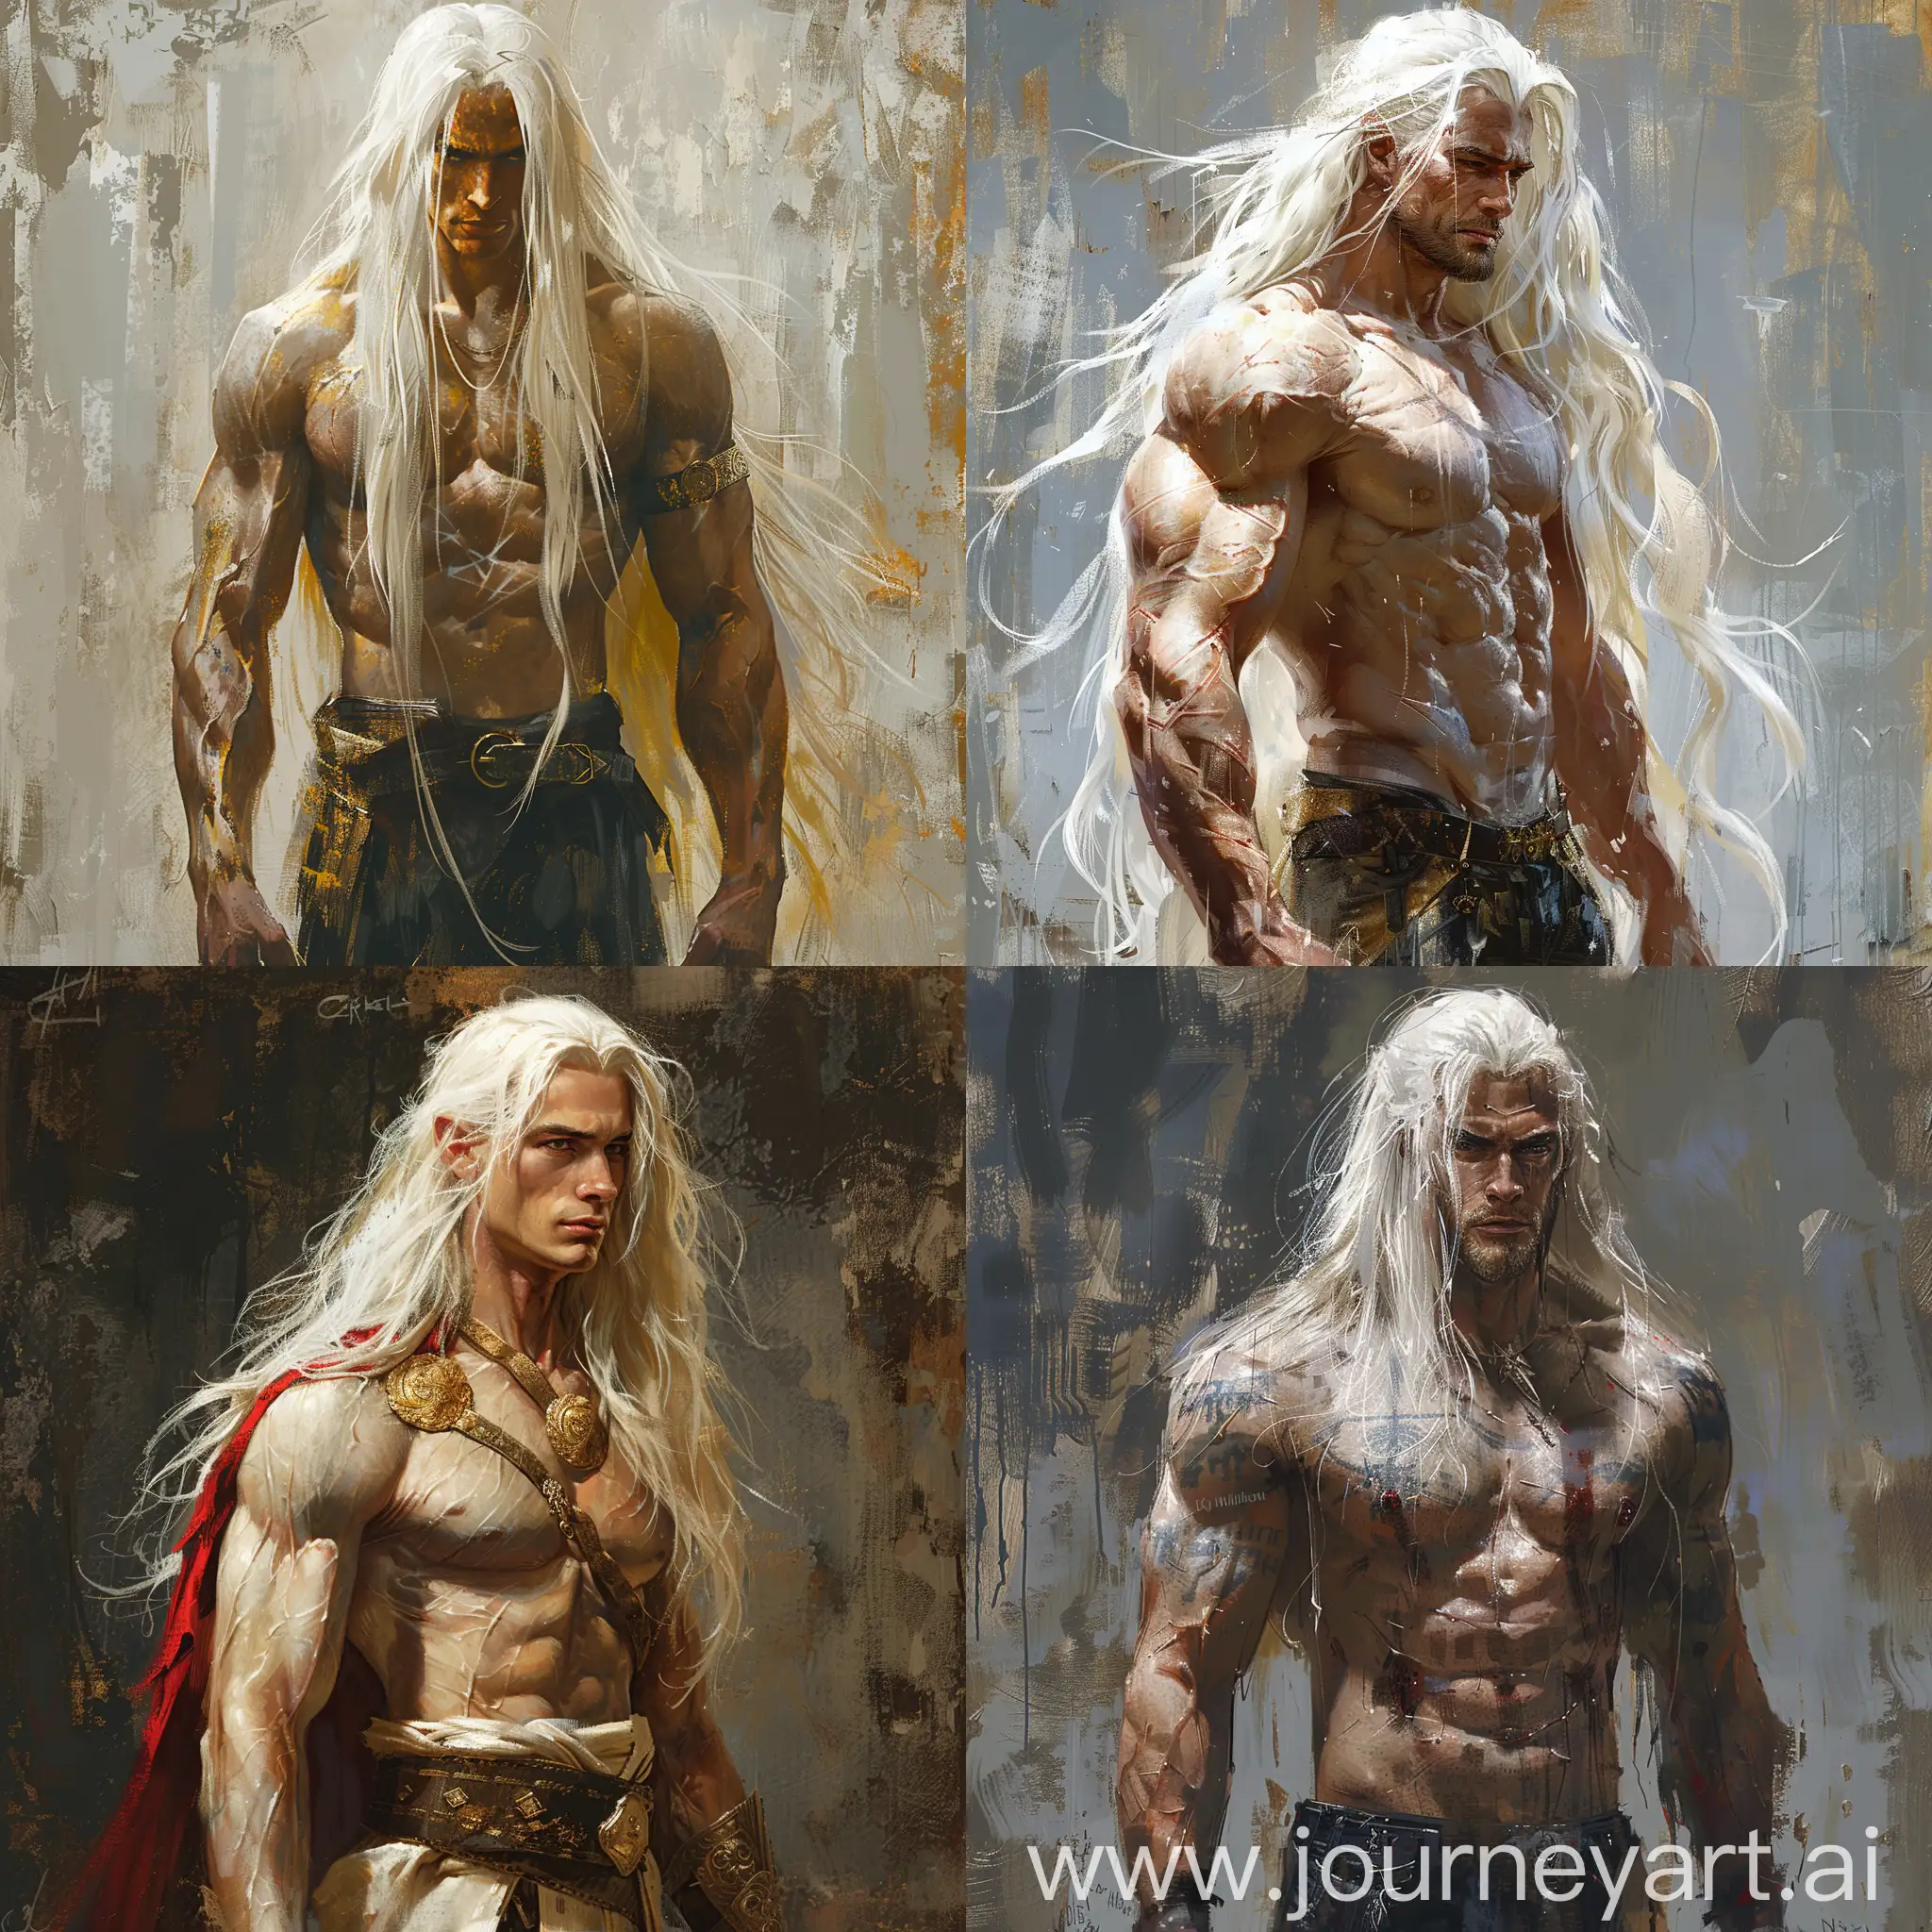 Majestic-Golden-Warrior-A-Realistic-Digital-Painting-of-a-Powerful-Figure-with-Mystical-Aura